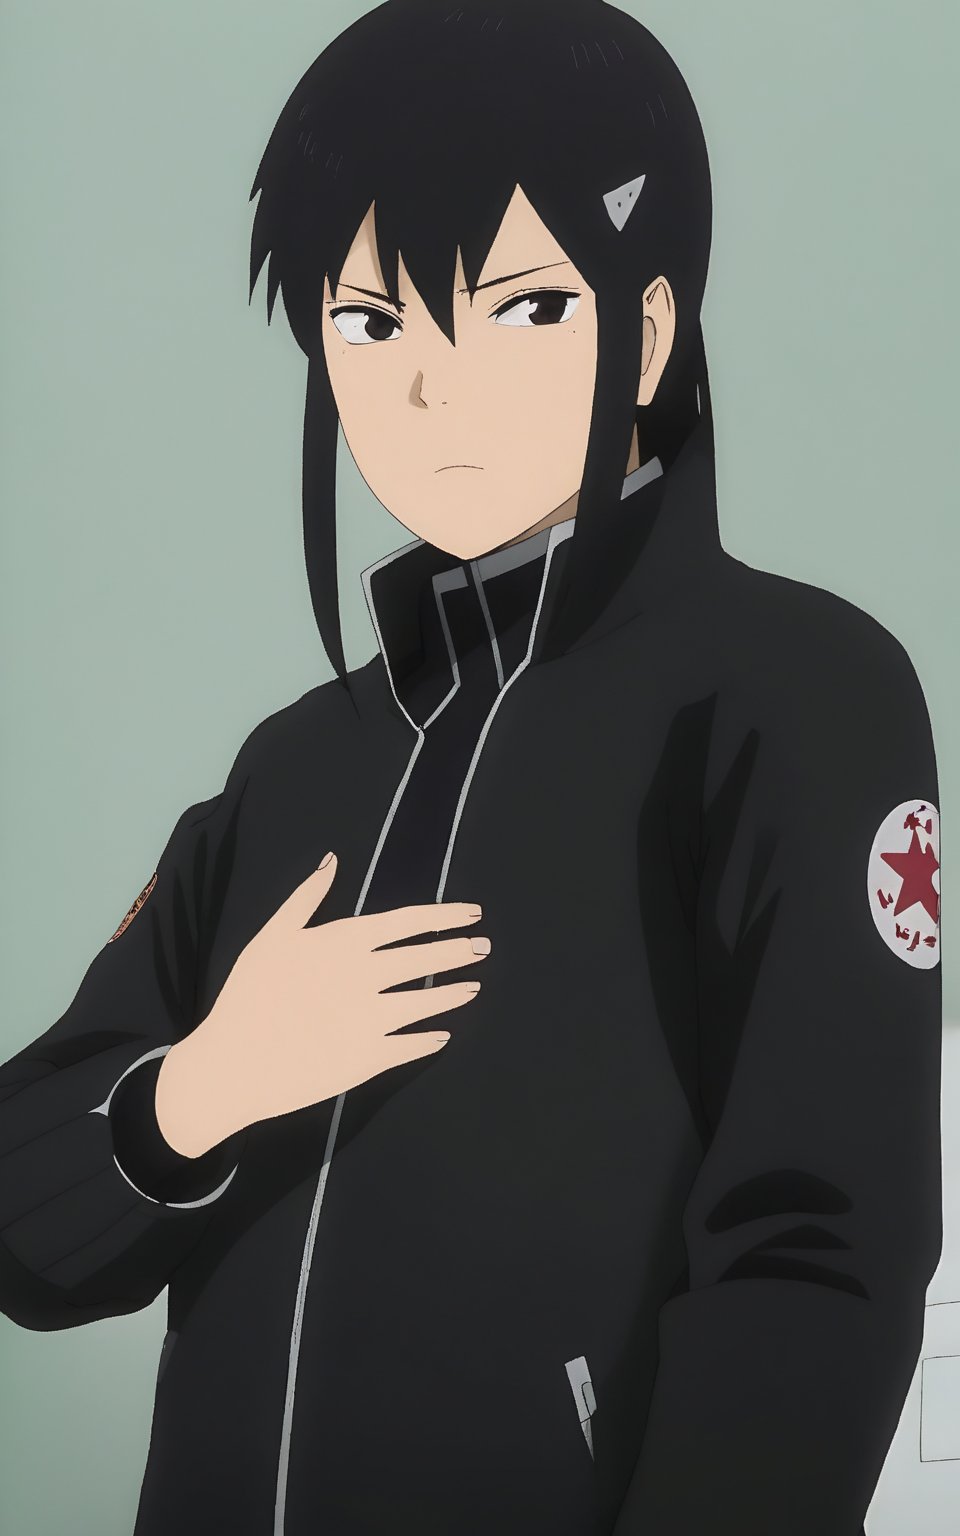 Kaiju No. 8, Mina Ashiro with black hair wearing a black jacket and holding his hand to his chest while looking at the camera